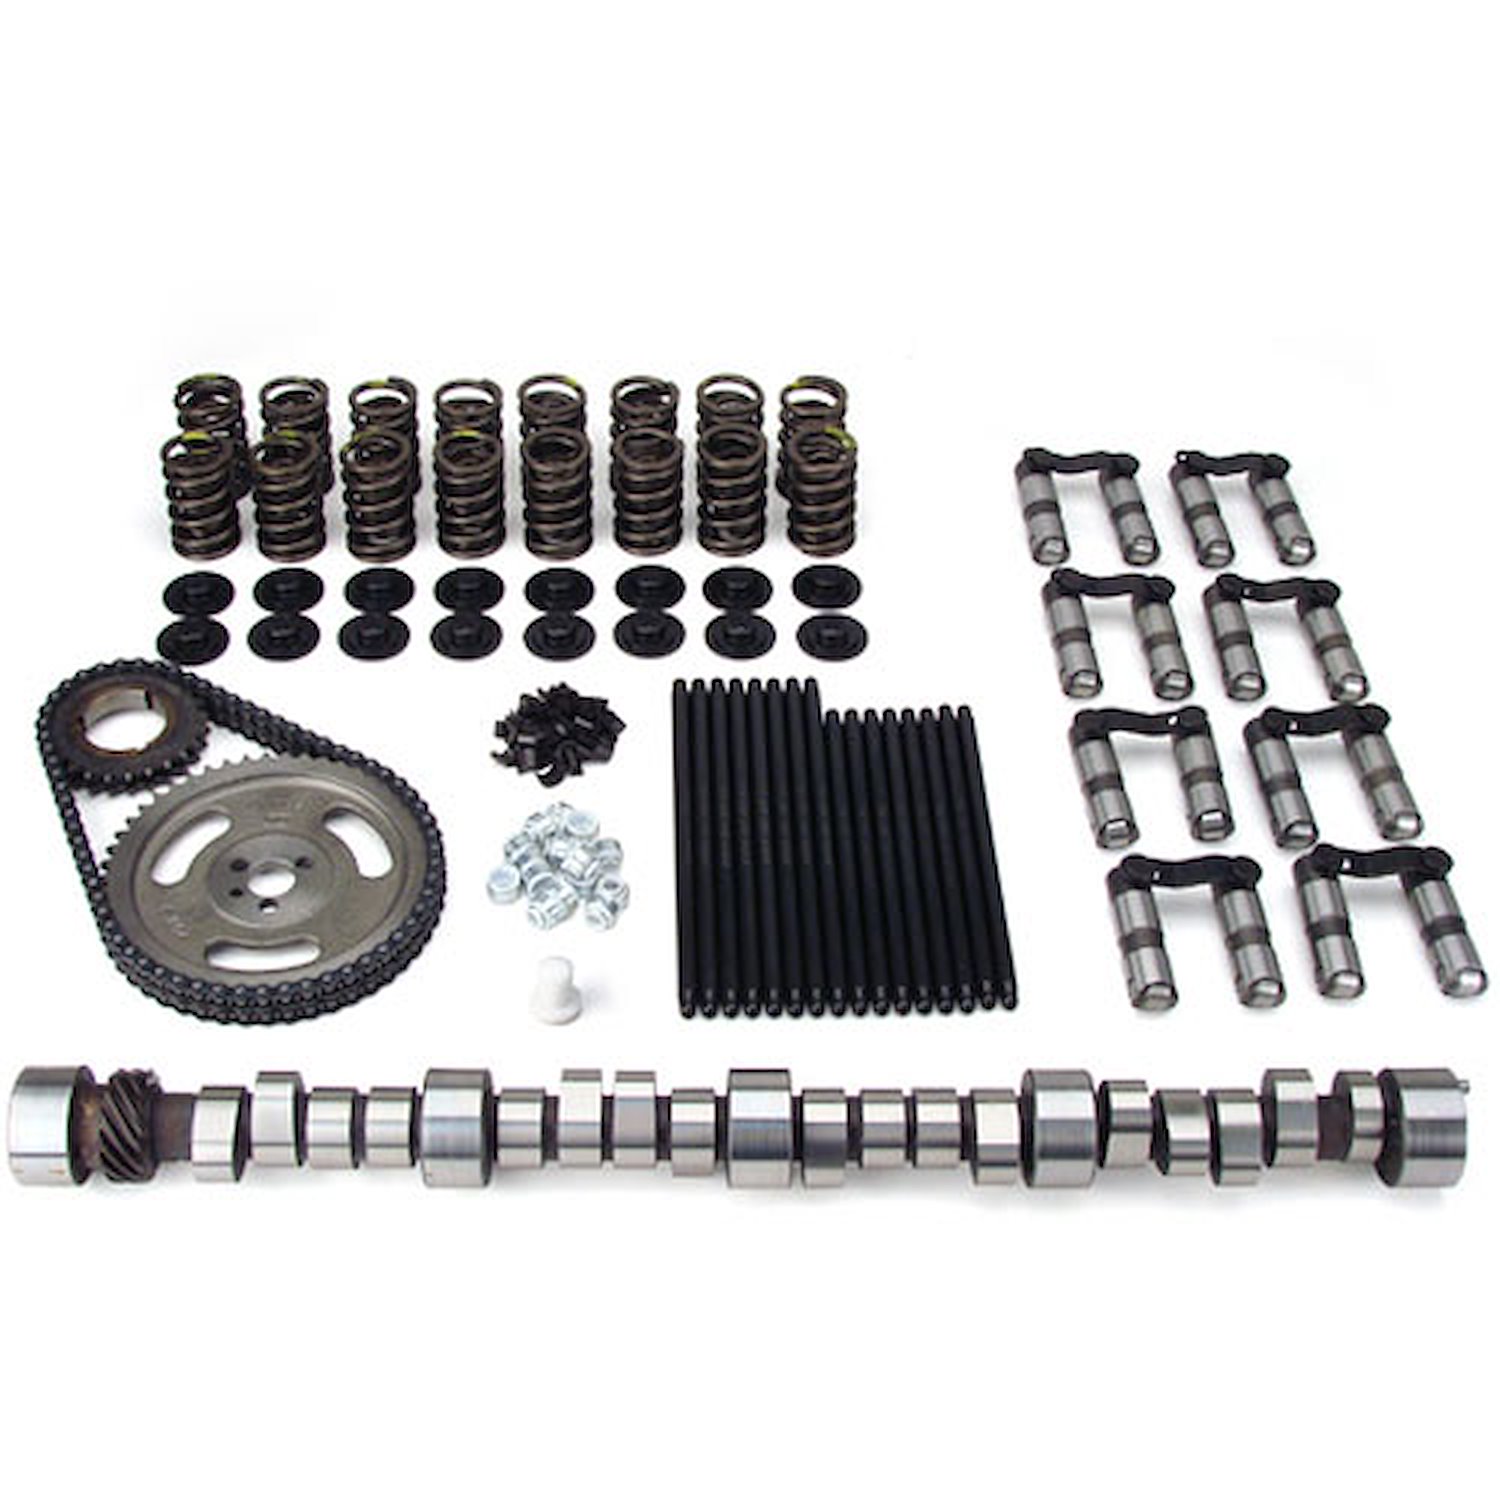 Magnum Hydraulic Roller Camshaft Complete Kit Chevy Small Block 305 & 350 Factory Roller Lift: .500"/.500"